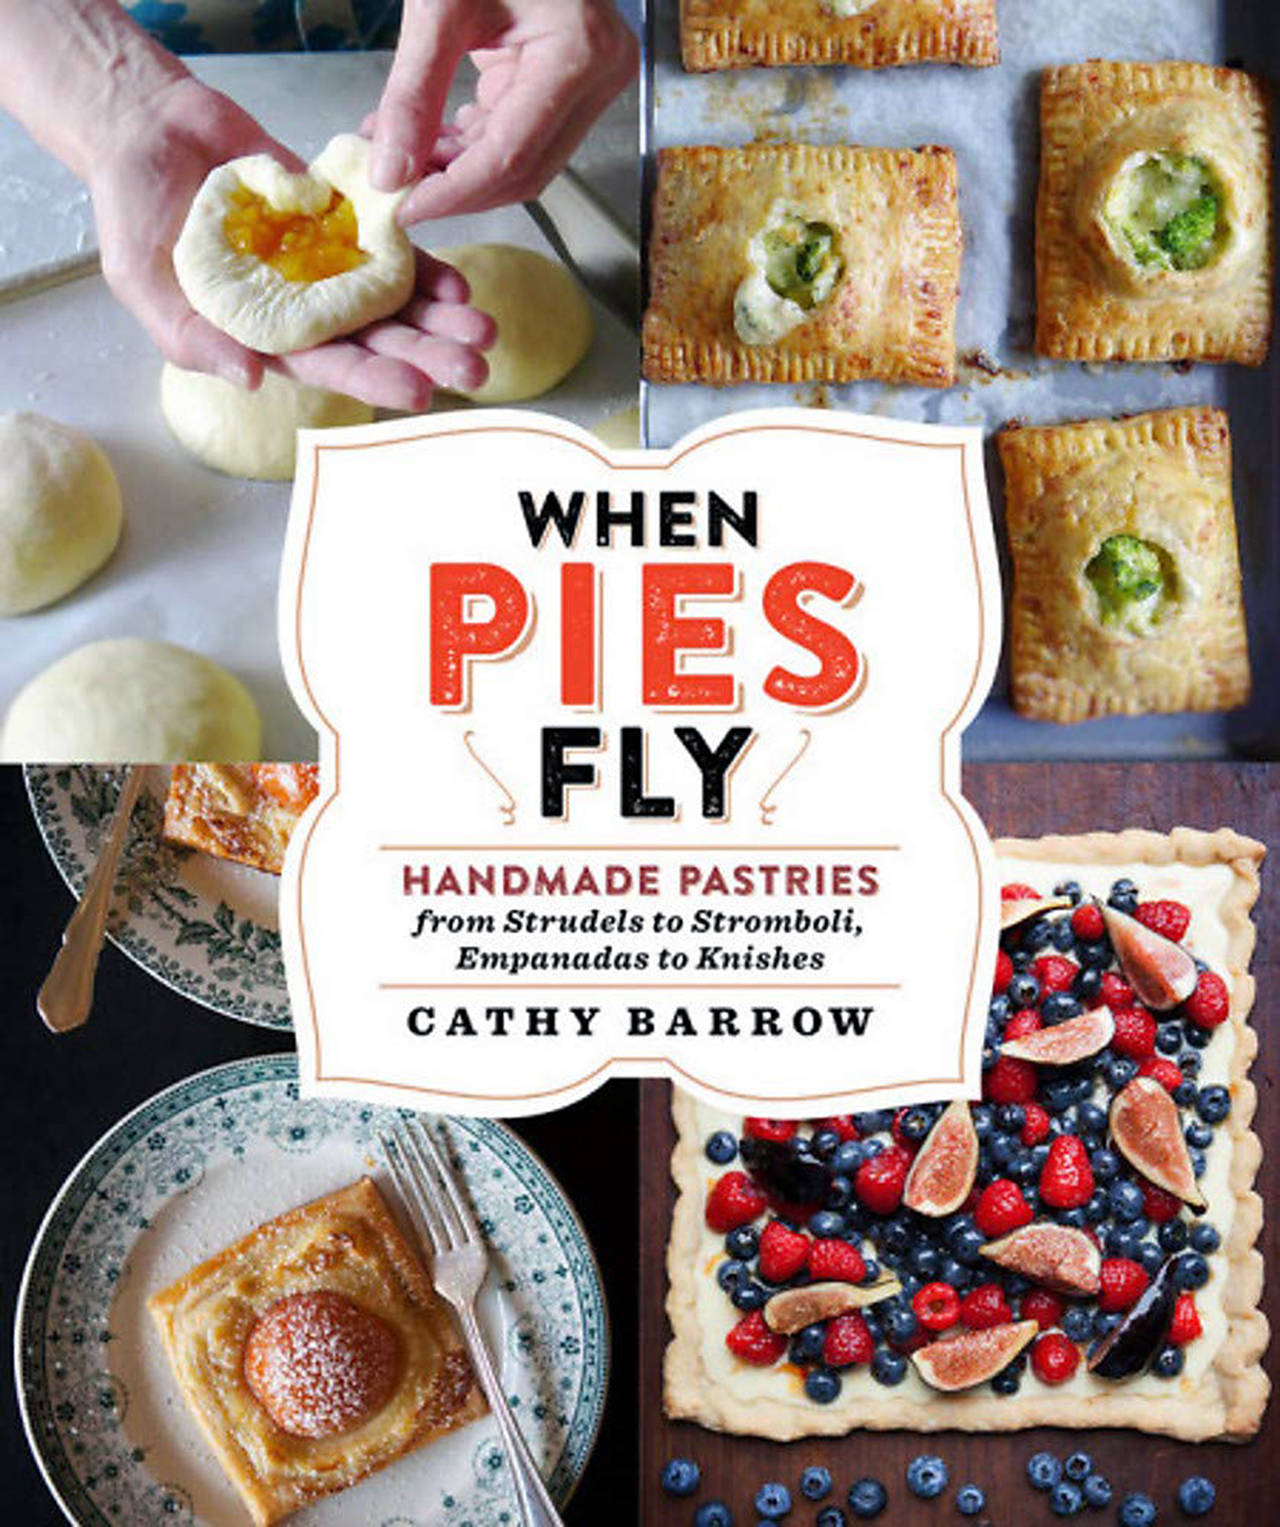 “When Pies Fly: Handmade Pastries from Strudels to Stromboli, Empanadas to Knishes,” by Cathy Barrow (Grand Central Publishing, $30).